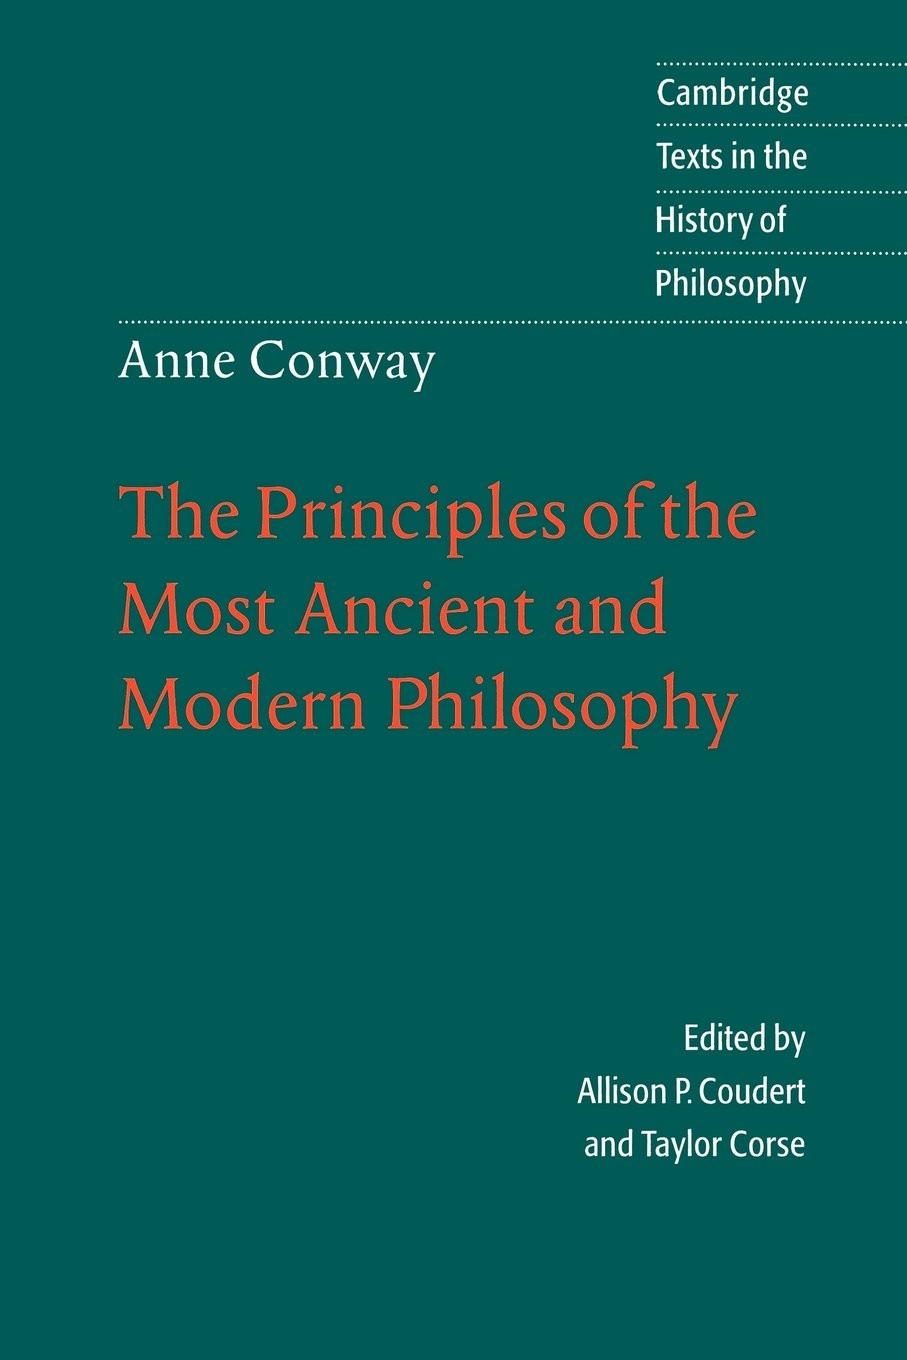 Anne Conway: The Principles of the Most Ancient and Modern Philosophy